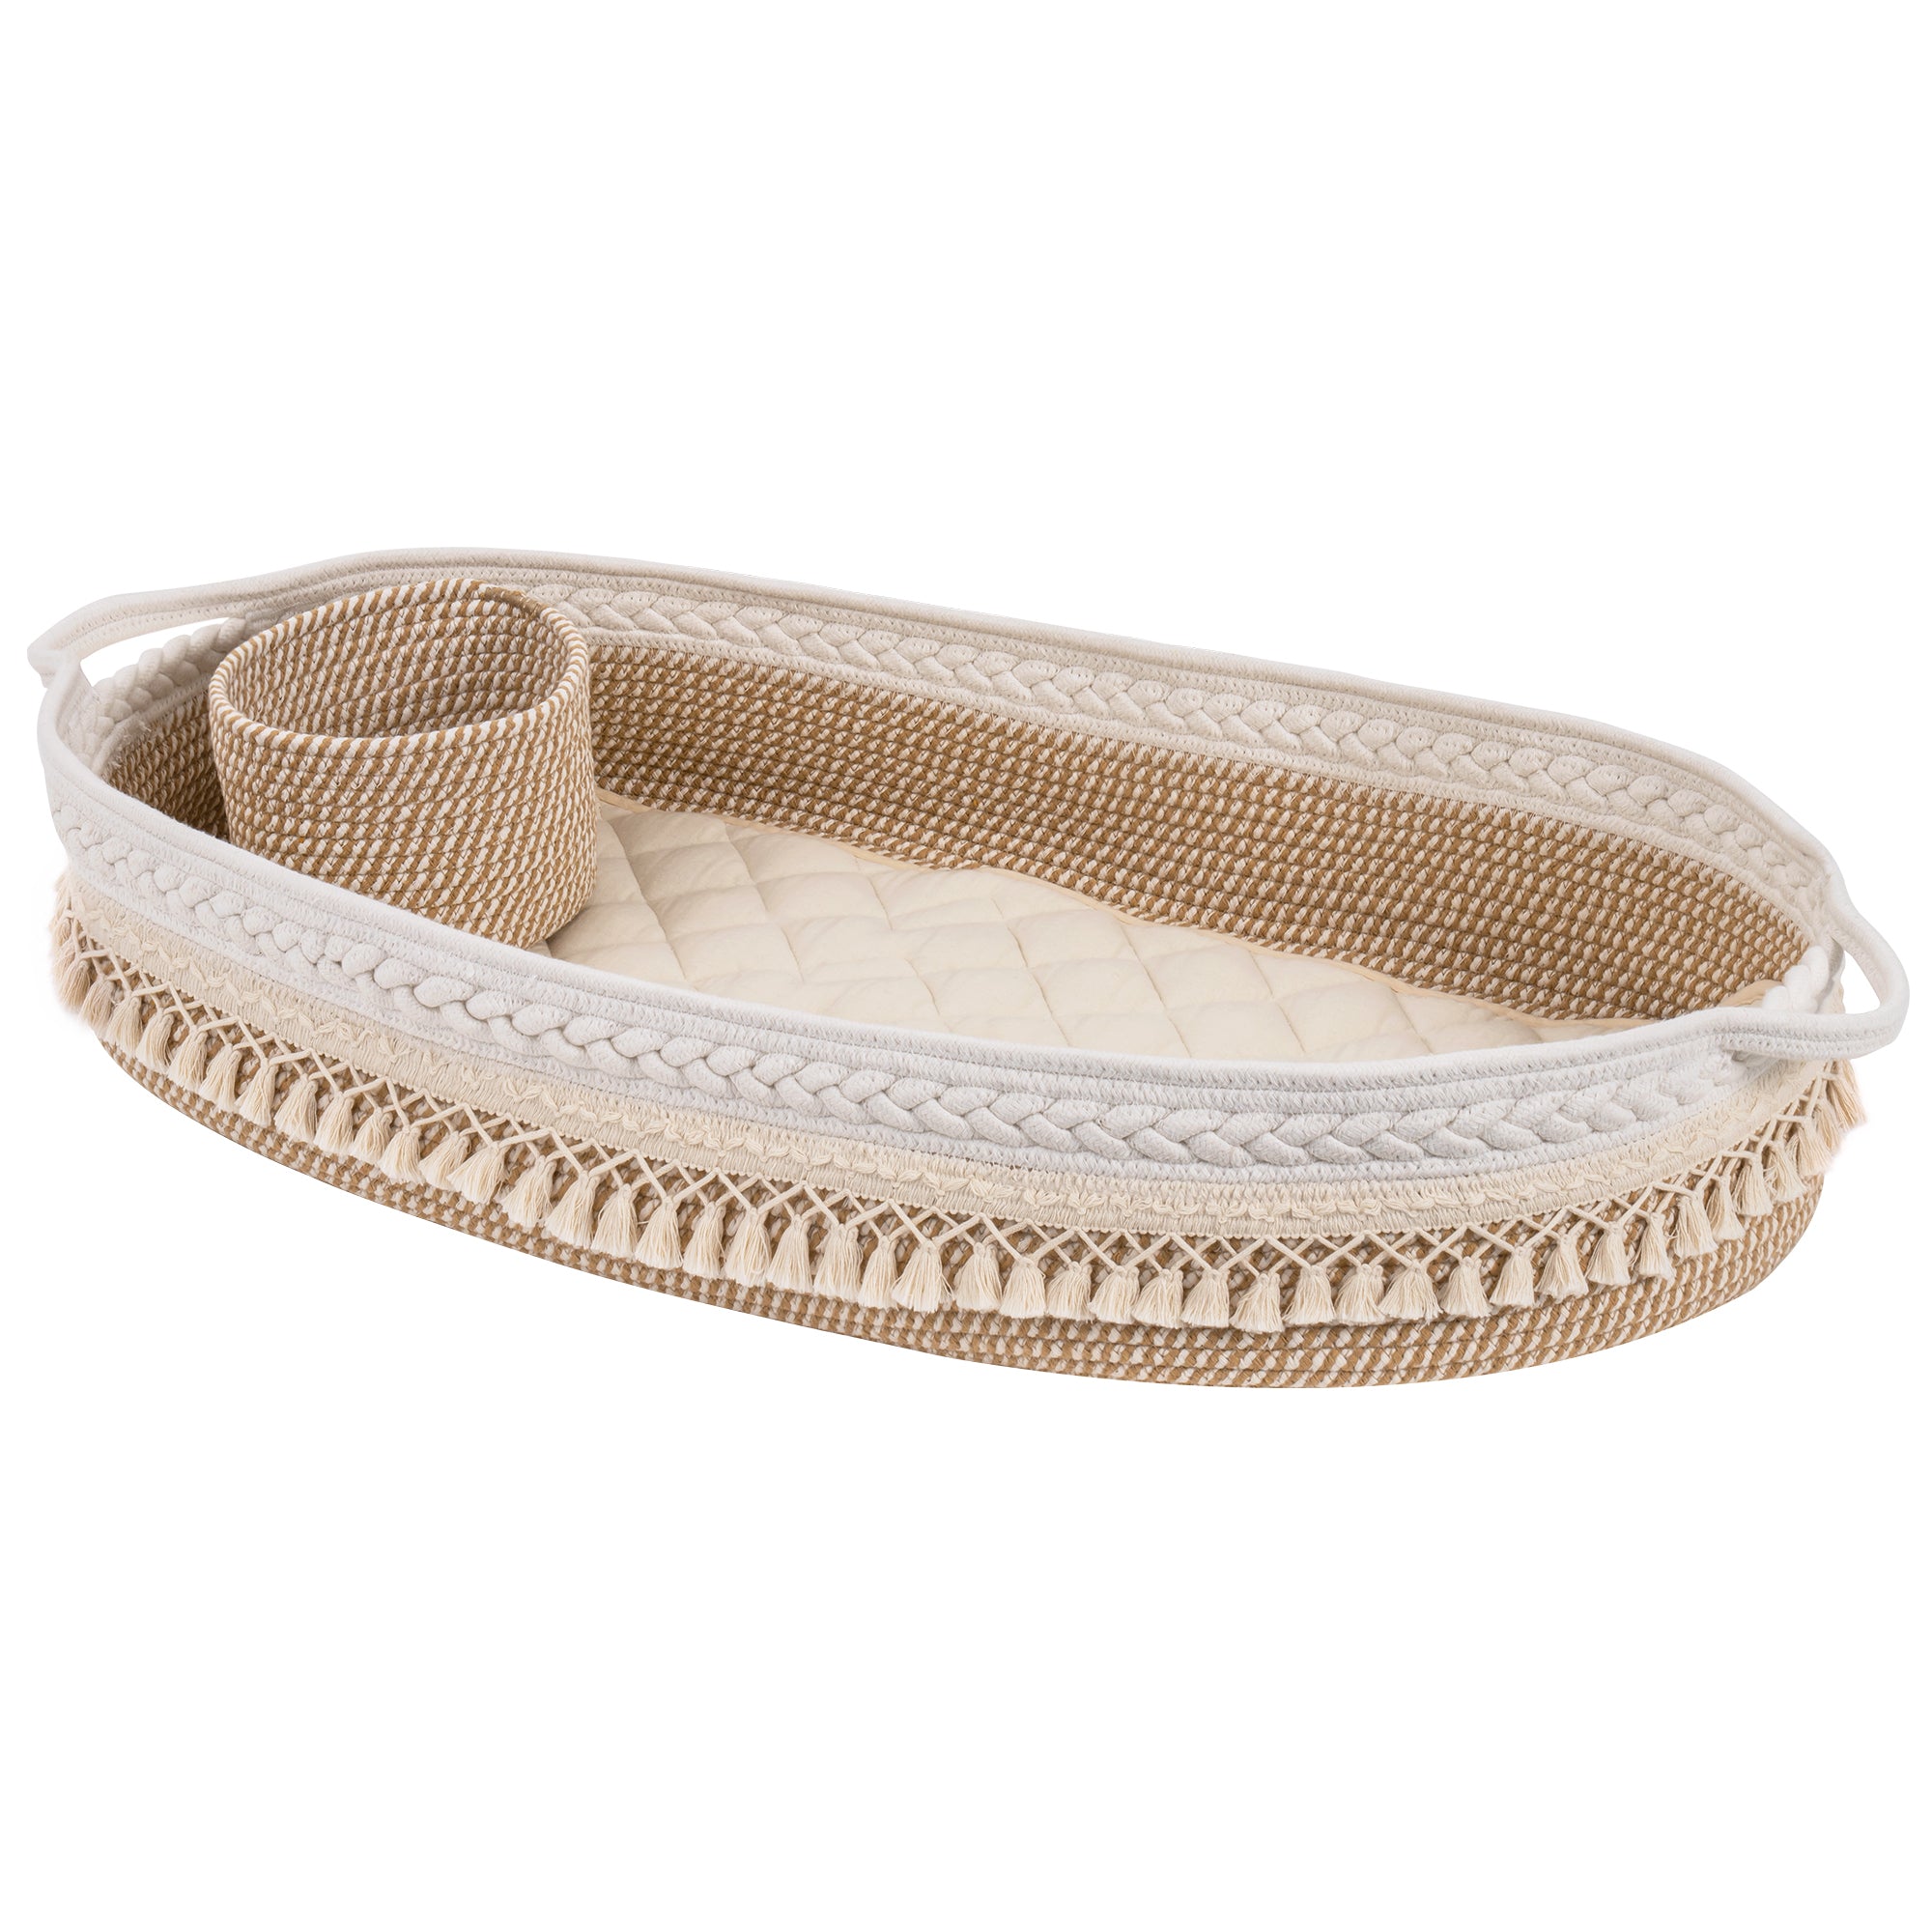 Baby Changing Handmade Woven Cotton Rope Moses Basket - Beige & Brown